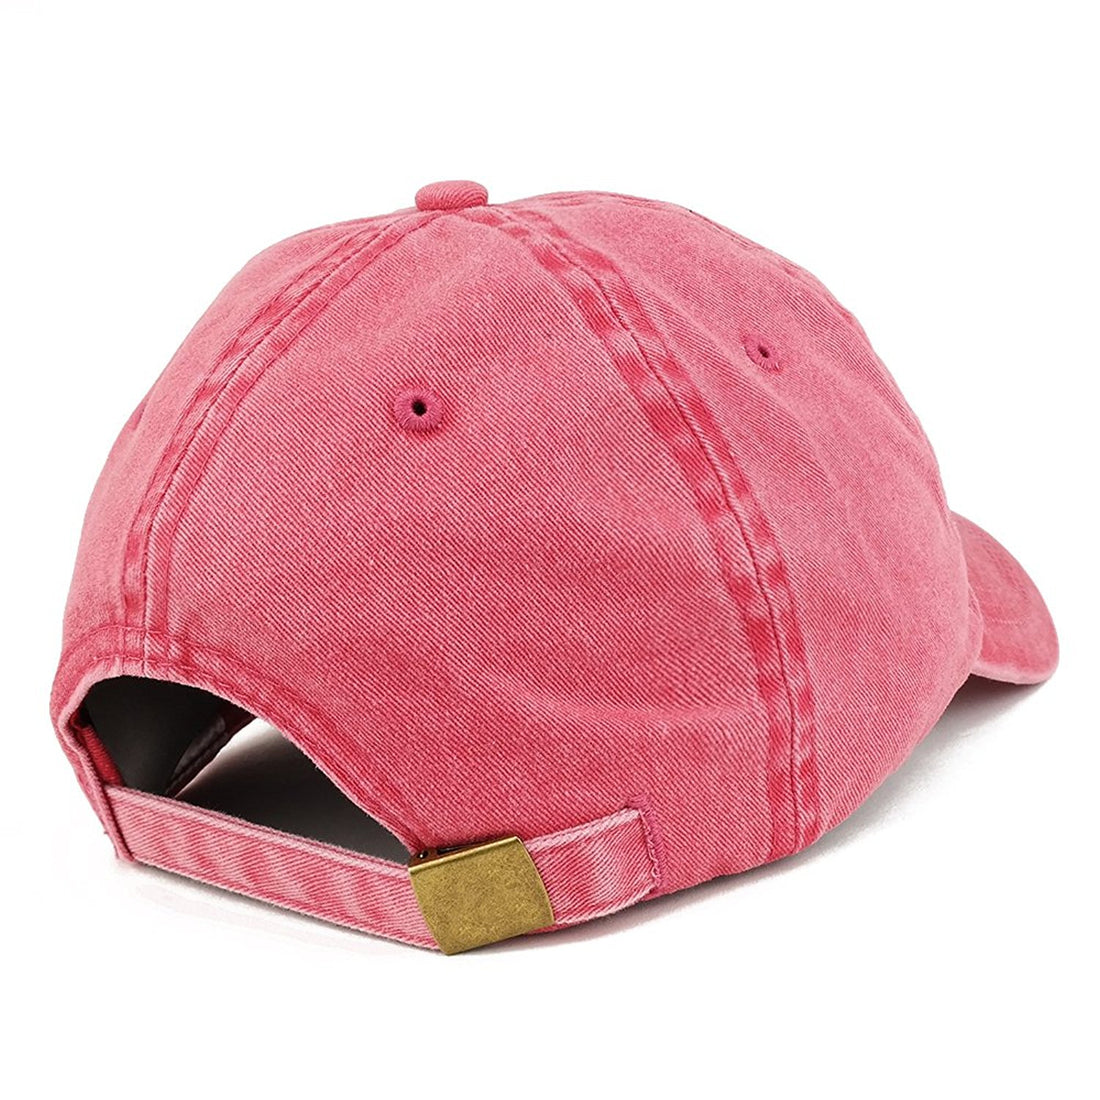 Trendy Apparel Shop Established 1955 Embroidered 64th Birthday Gift Pigment Dyed Washed Cotton Cap